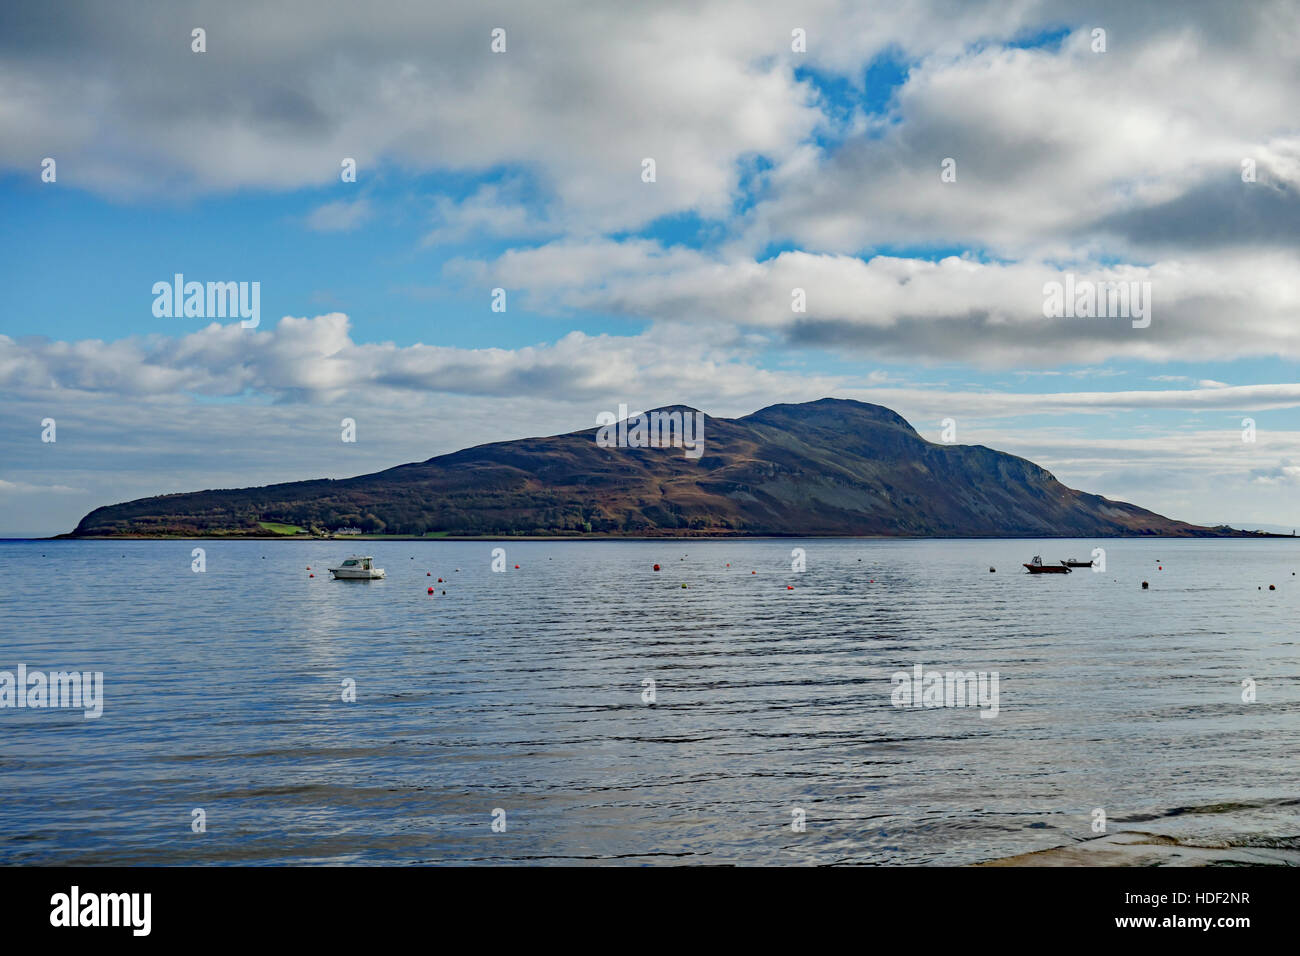 Holy Isle in Lamlash Bay, Isle of Arran, in the Firth of Clyde, Scotland. Stock Photo